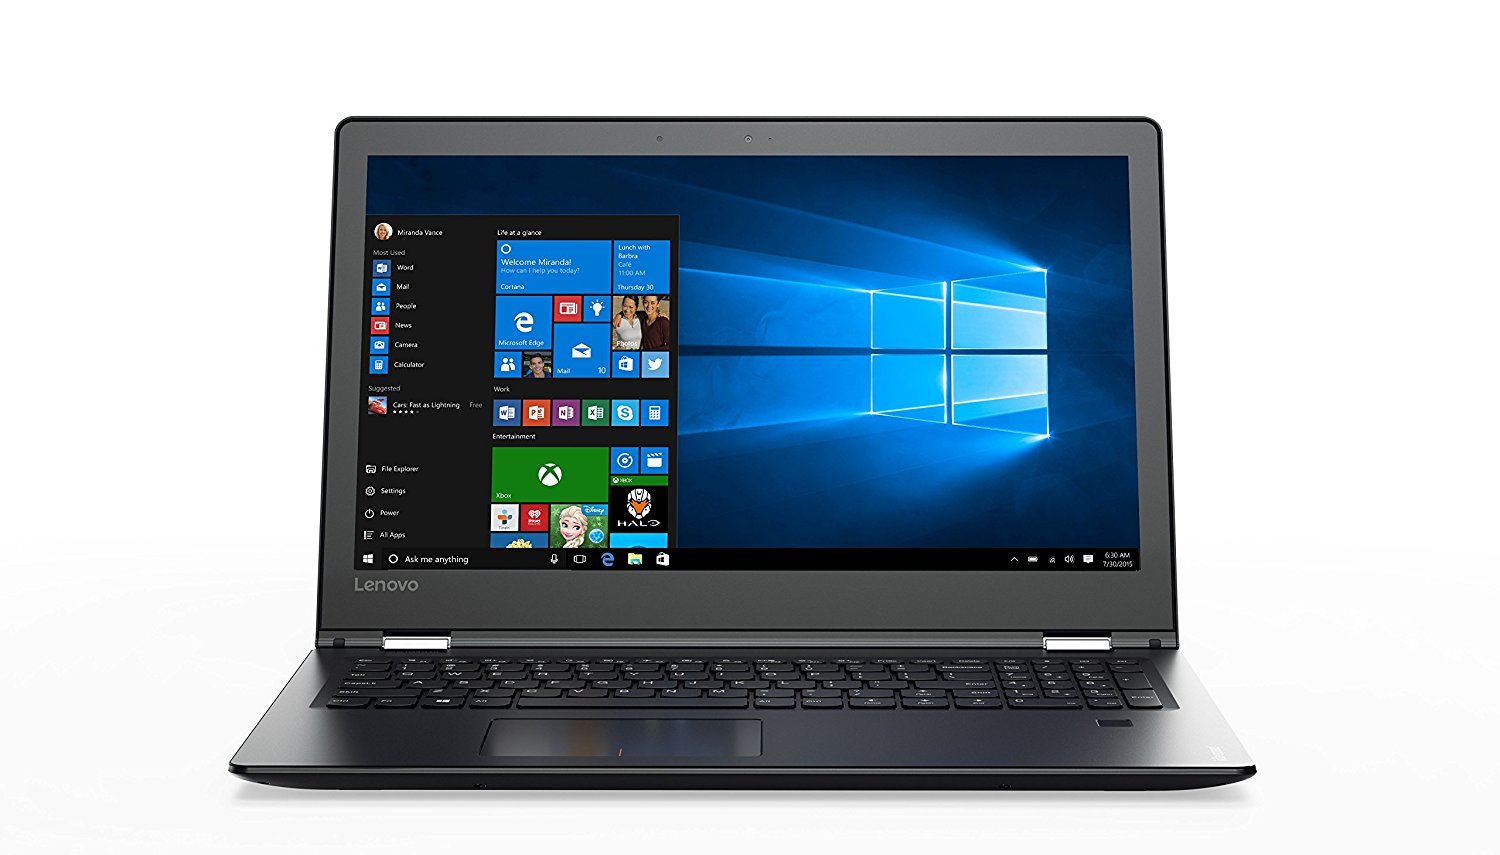 Deal: Lenovo Flex 4 with Intel Core i5, 8GB RAM and 256GB SSD now available for just $549.99